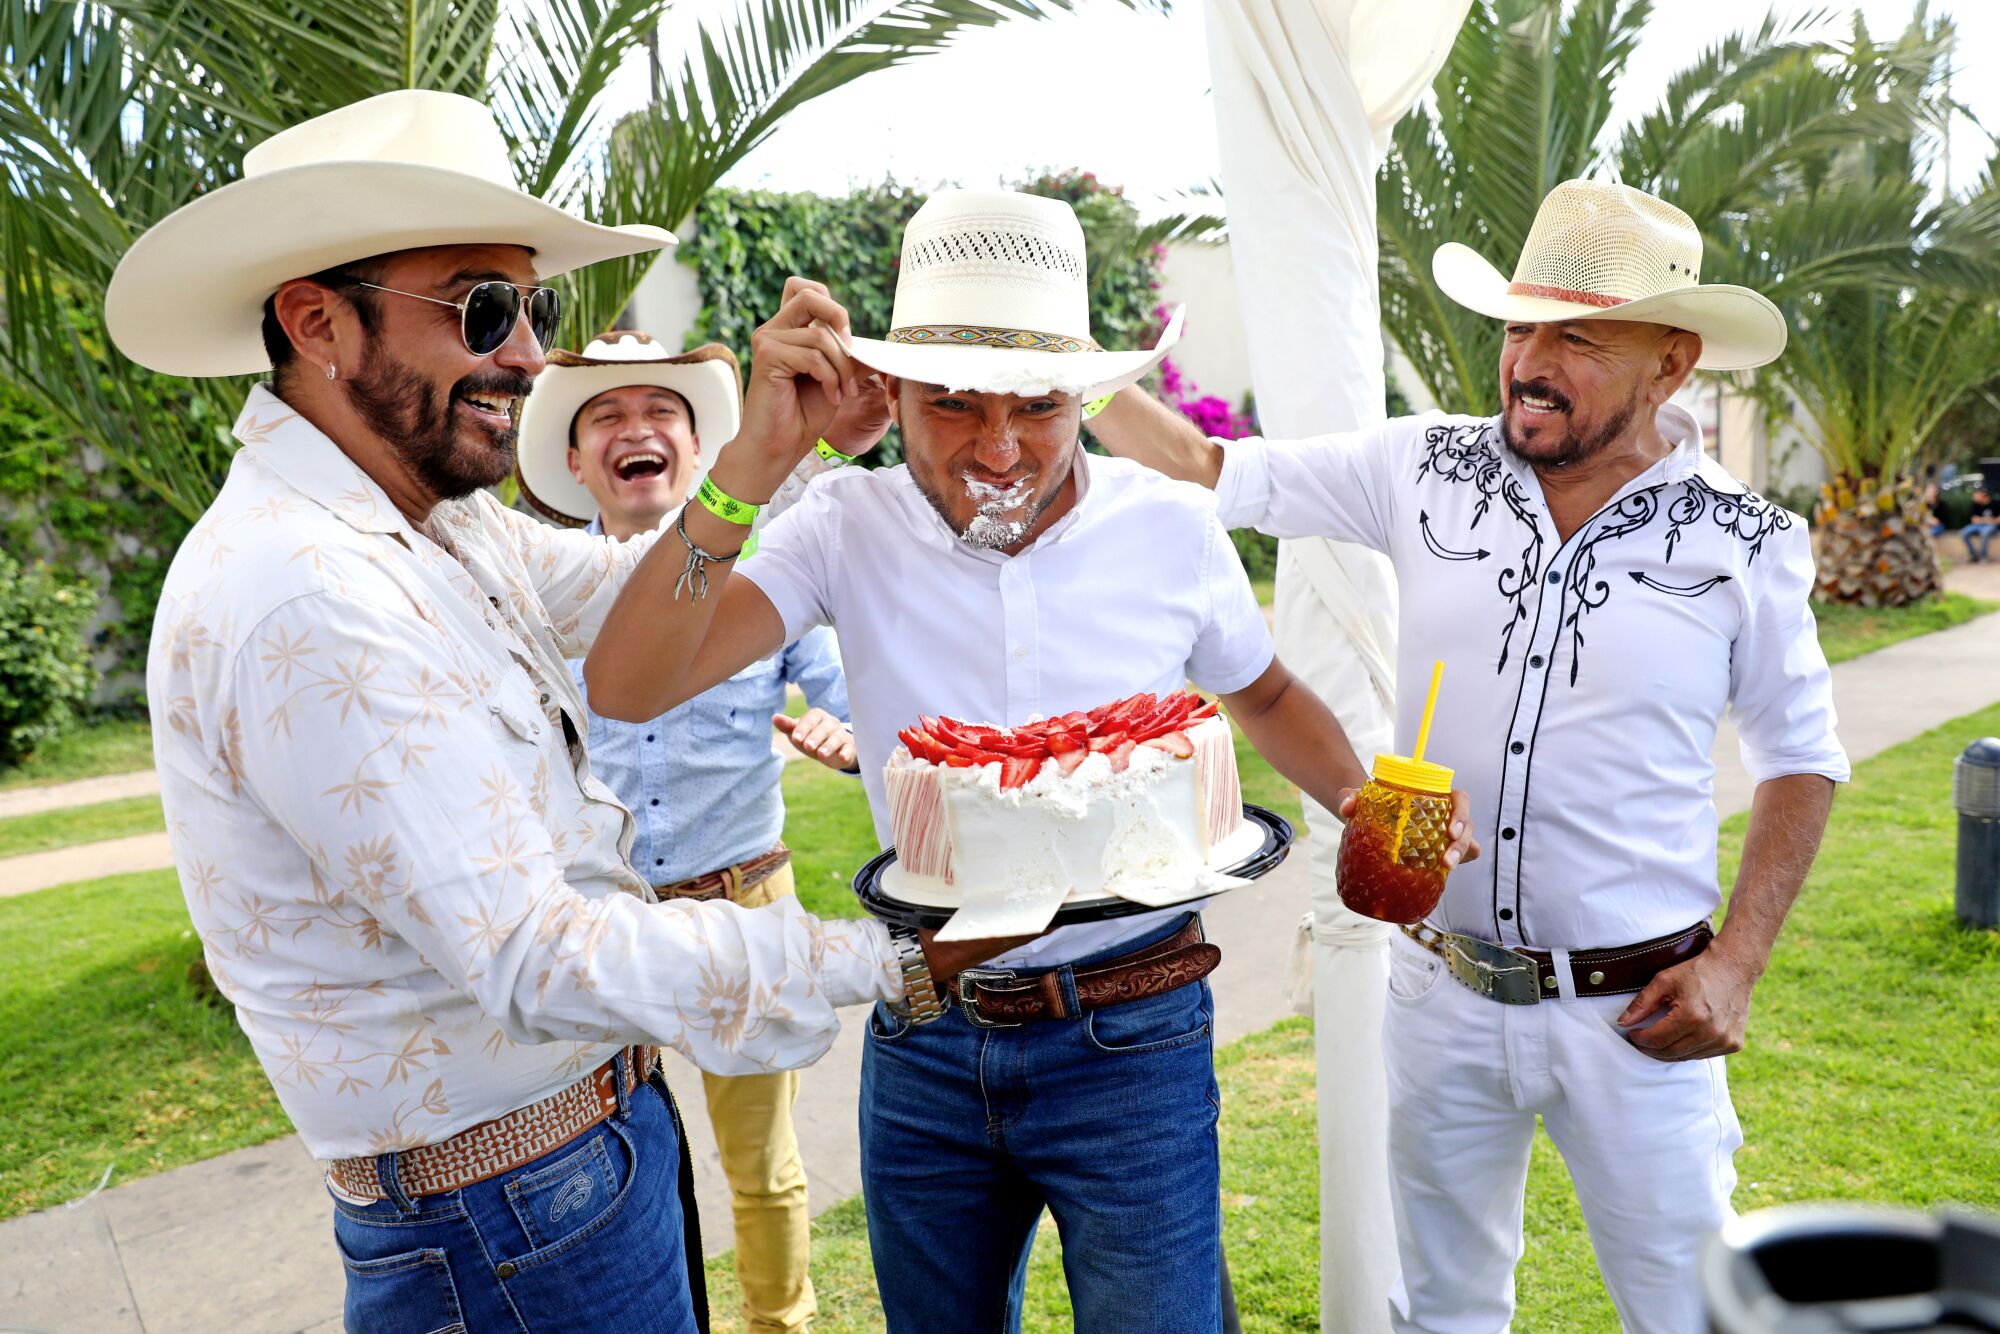  Men in cowboy hats present a friend with a birthday cake. 